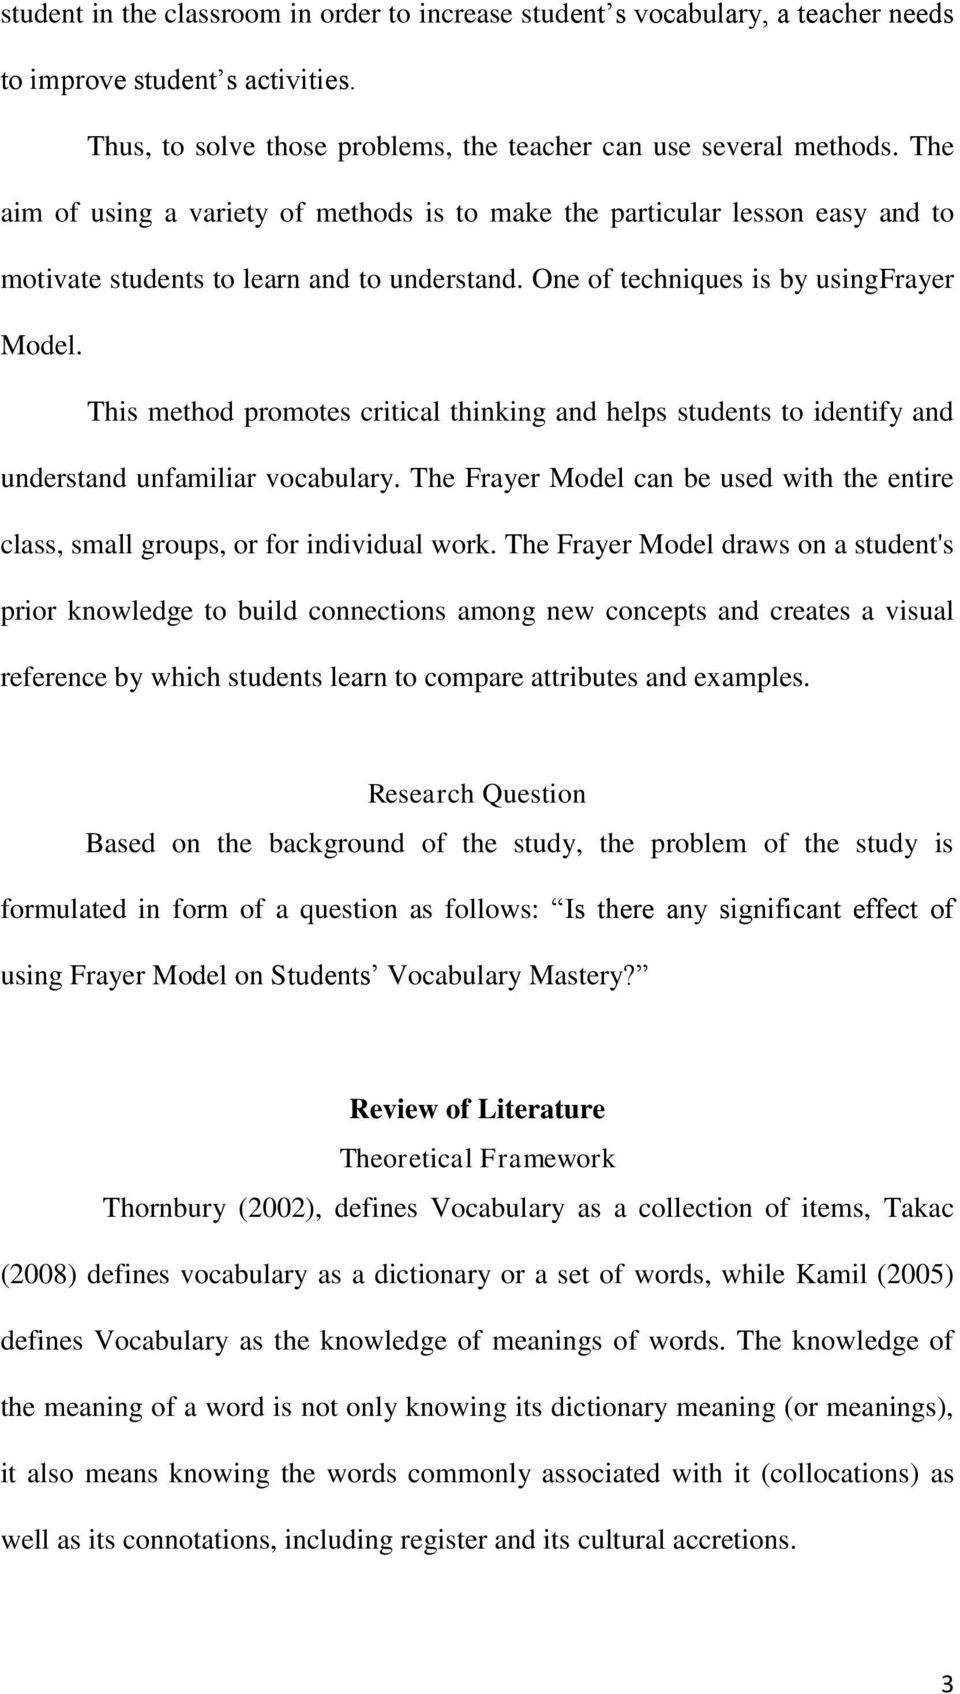 This method promotes critical thinking and helps students to identify and understand unfamiliar vocabulary. The Frayer Model can be used with the entire class, small groups, or for individual work.